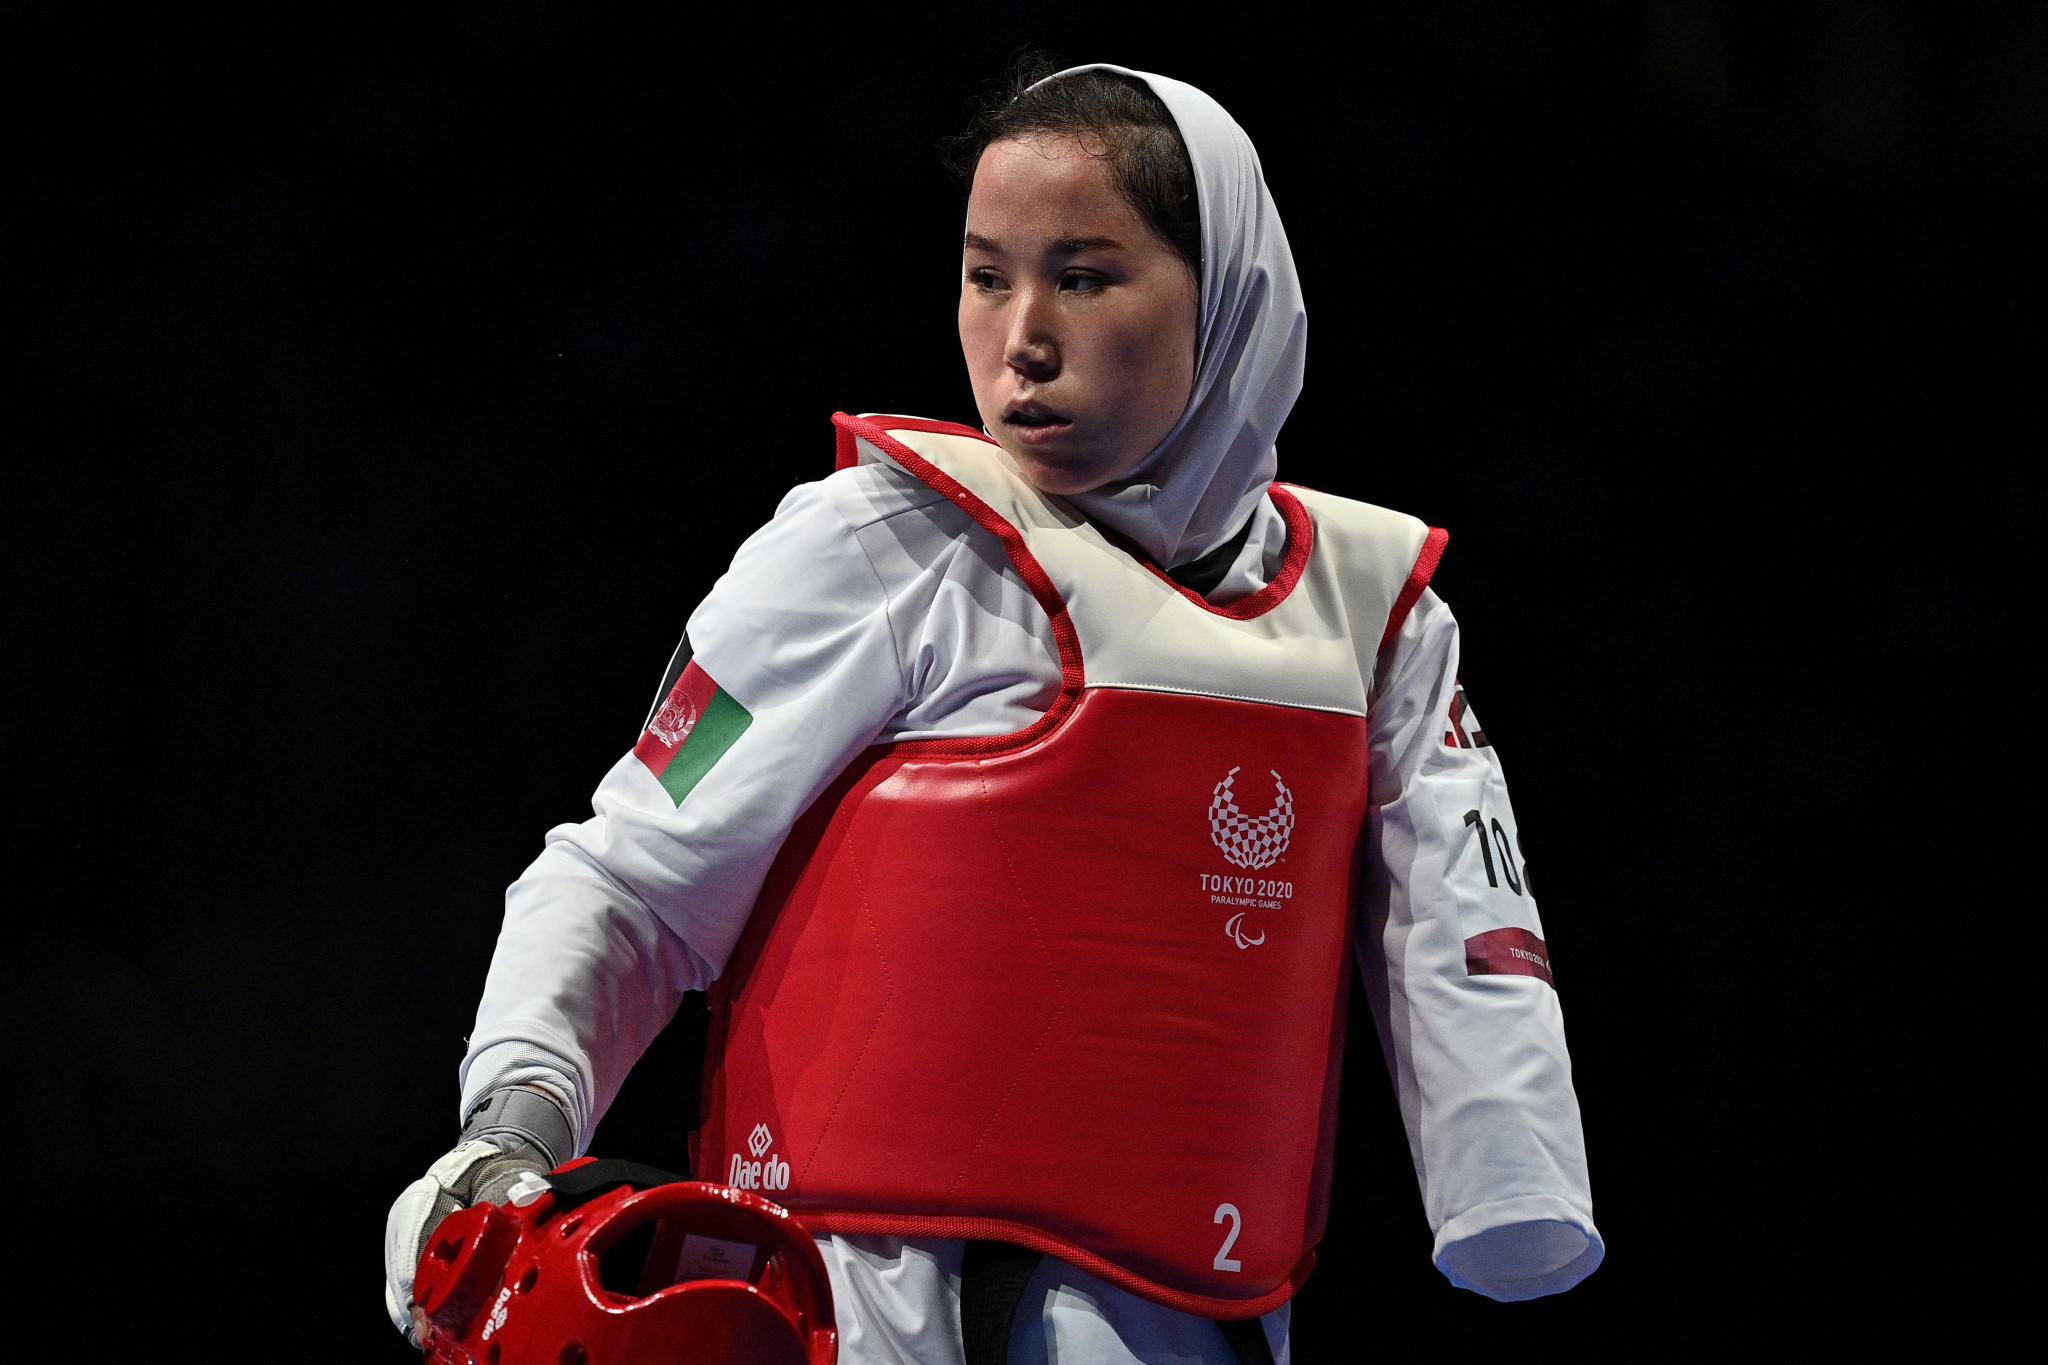 Zakia Khudadadi competed for Afghanistan at the Tokyo 2020 Paralympic Games ©Getty Images